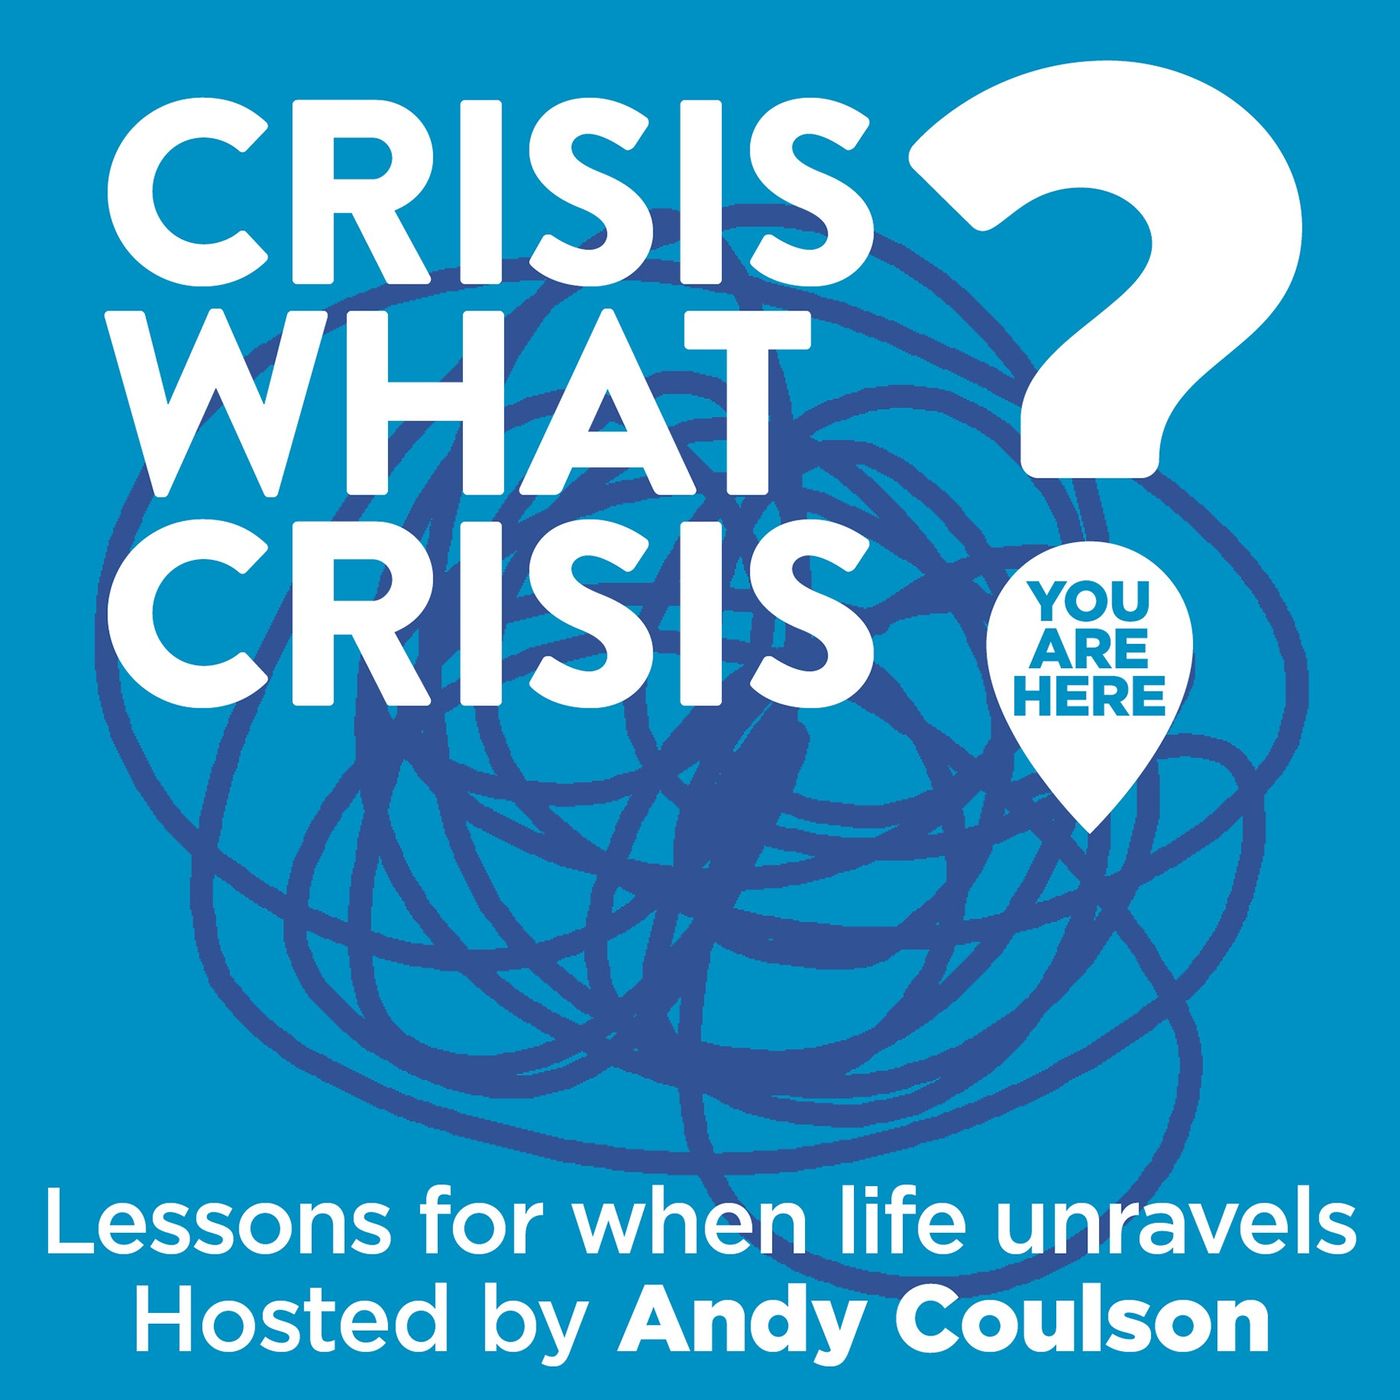 8. Andy Coulson on regrets, resilience and recovery